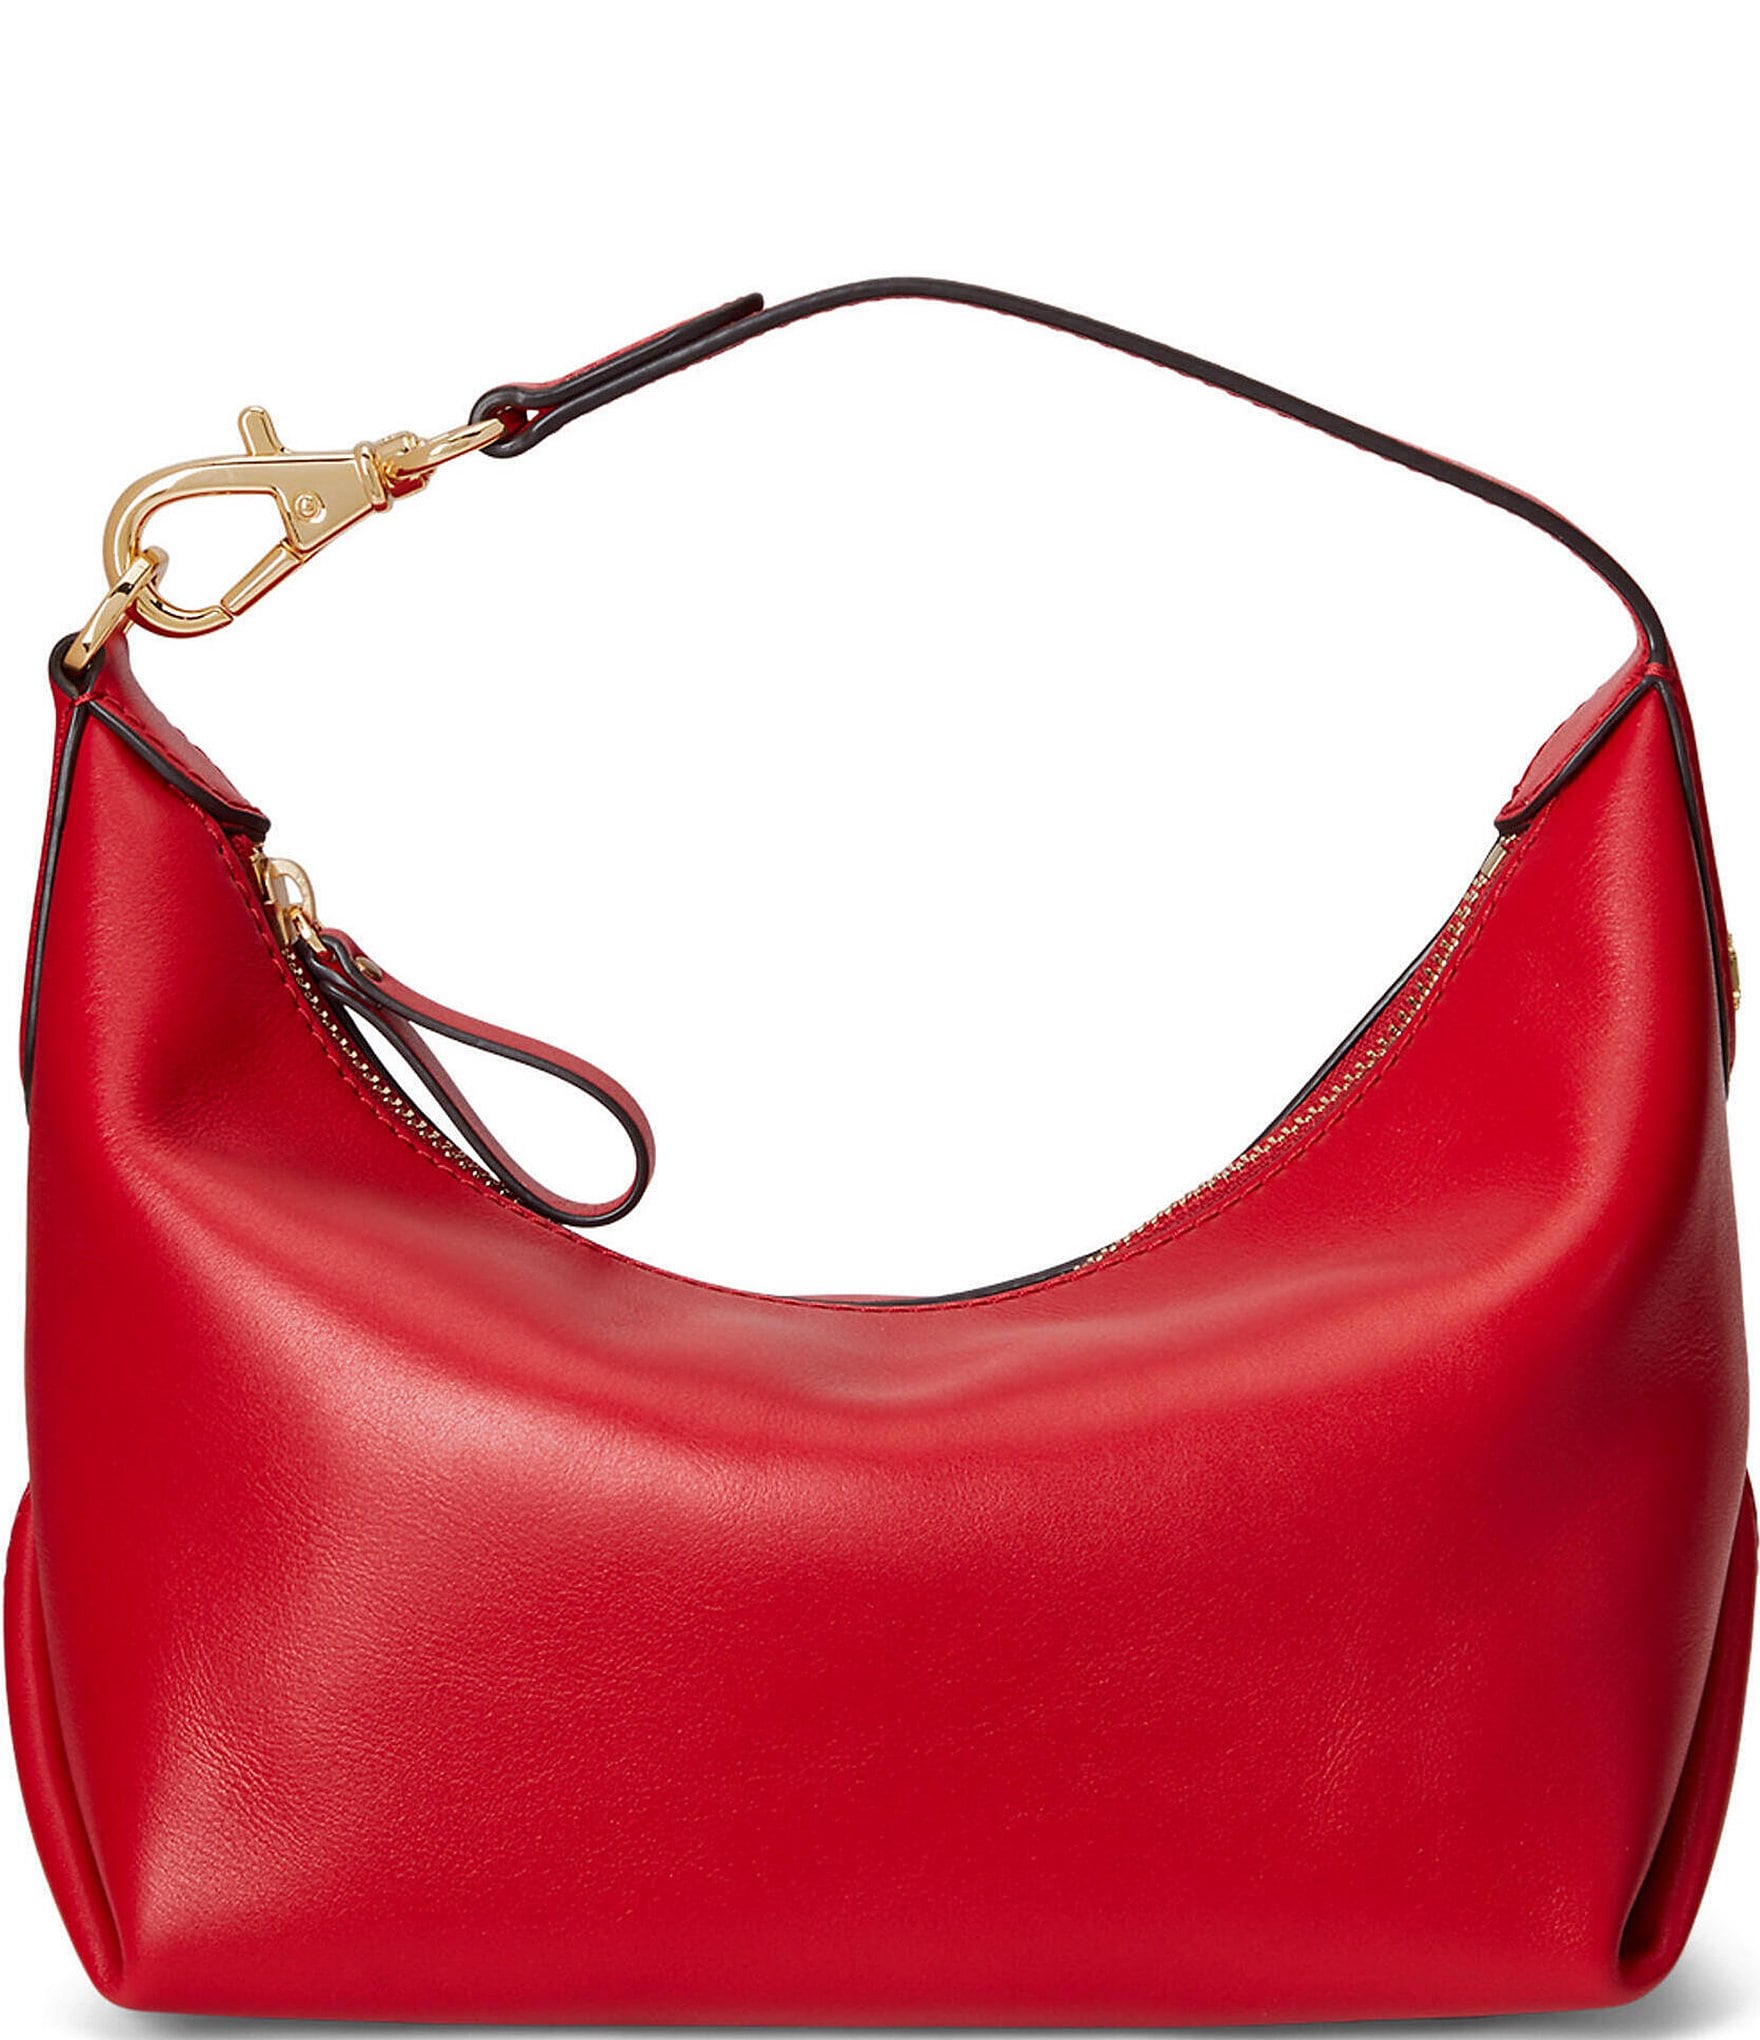 Best Red Ralph Lauren Purse for sale in Tampa, Florida for 2023